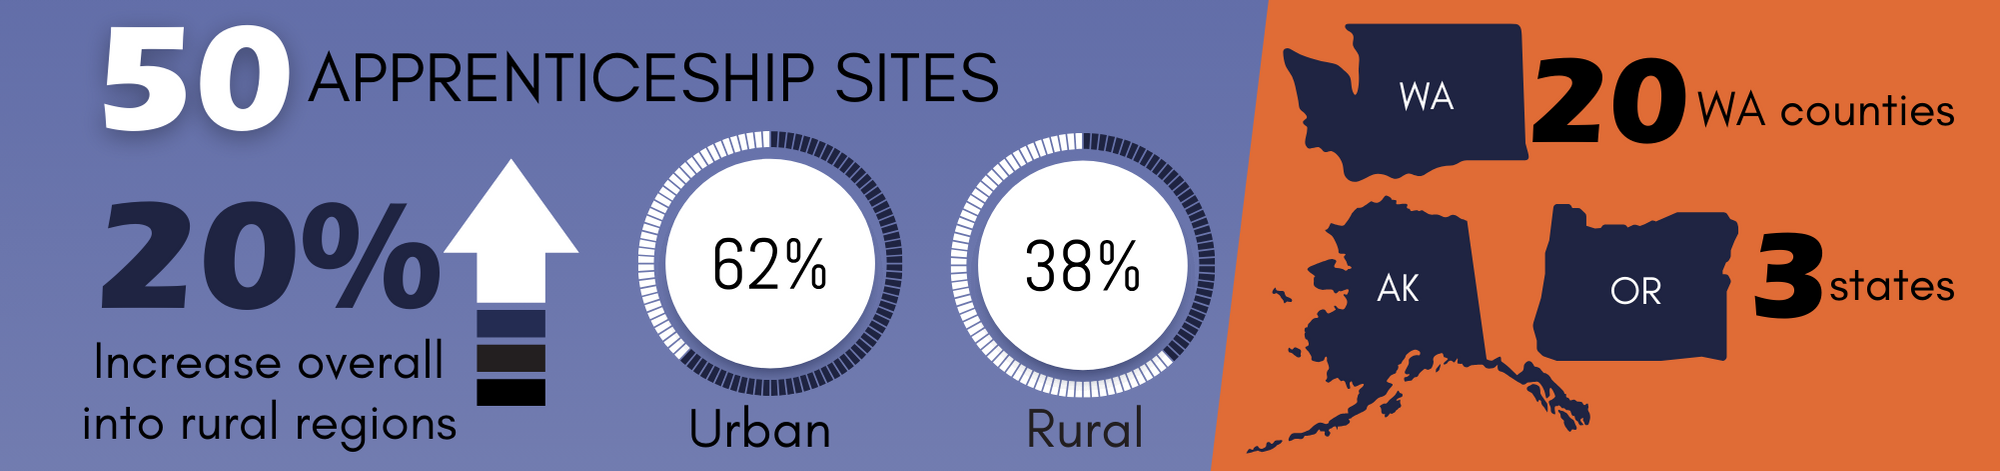 Banner image: Text "50 Apprenticeship sites" across the top. Left side with a purple bacgkround "20% increase overall in rural regions", "62% urban" and "38% rural". Right side on an orange background is the shape of the states Washington, Alaska, and Oregon. "16 WA counties" and "3 States".